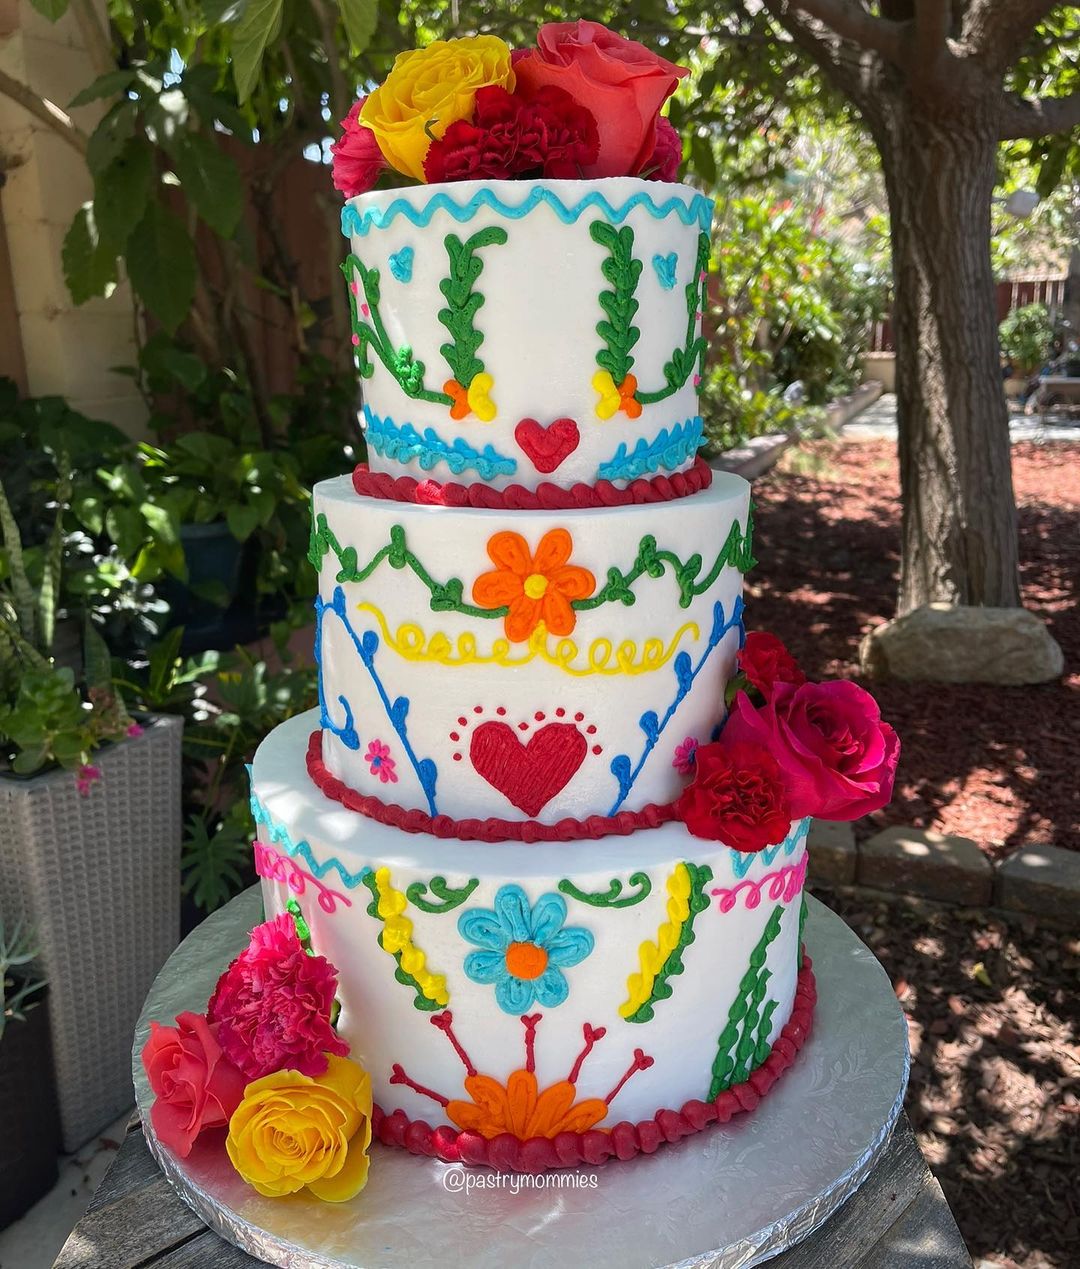 3 tier colorful mexican embroidery wedding cake with red yellow flowers via pastrymommies